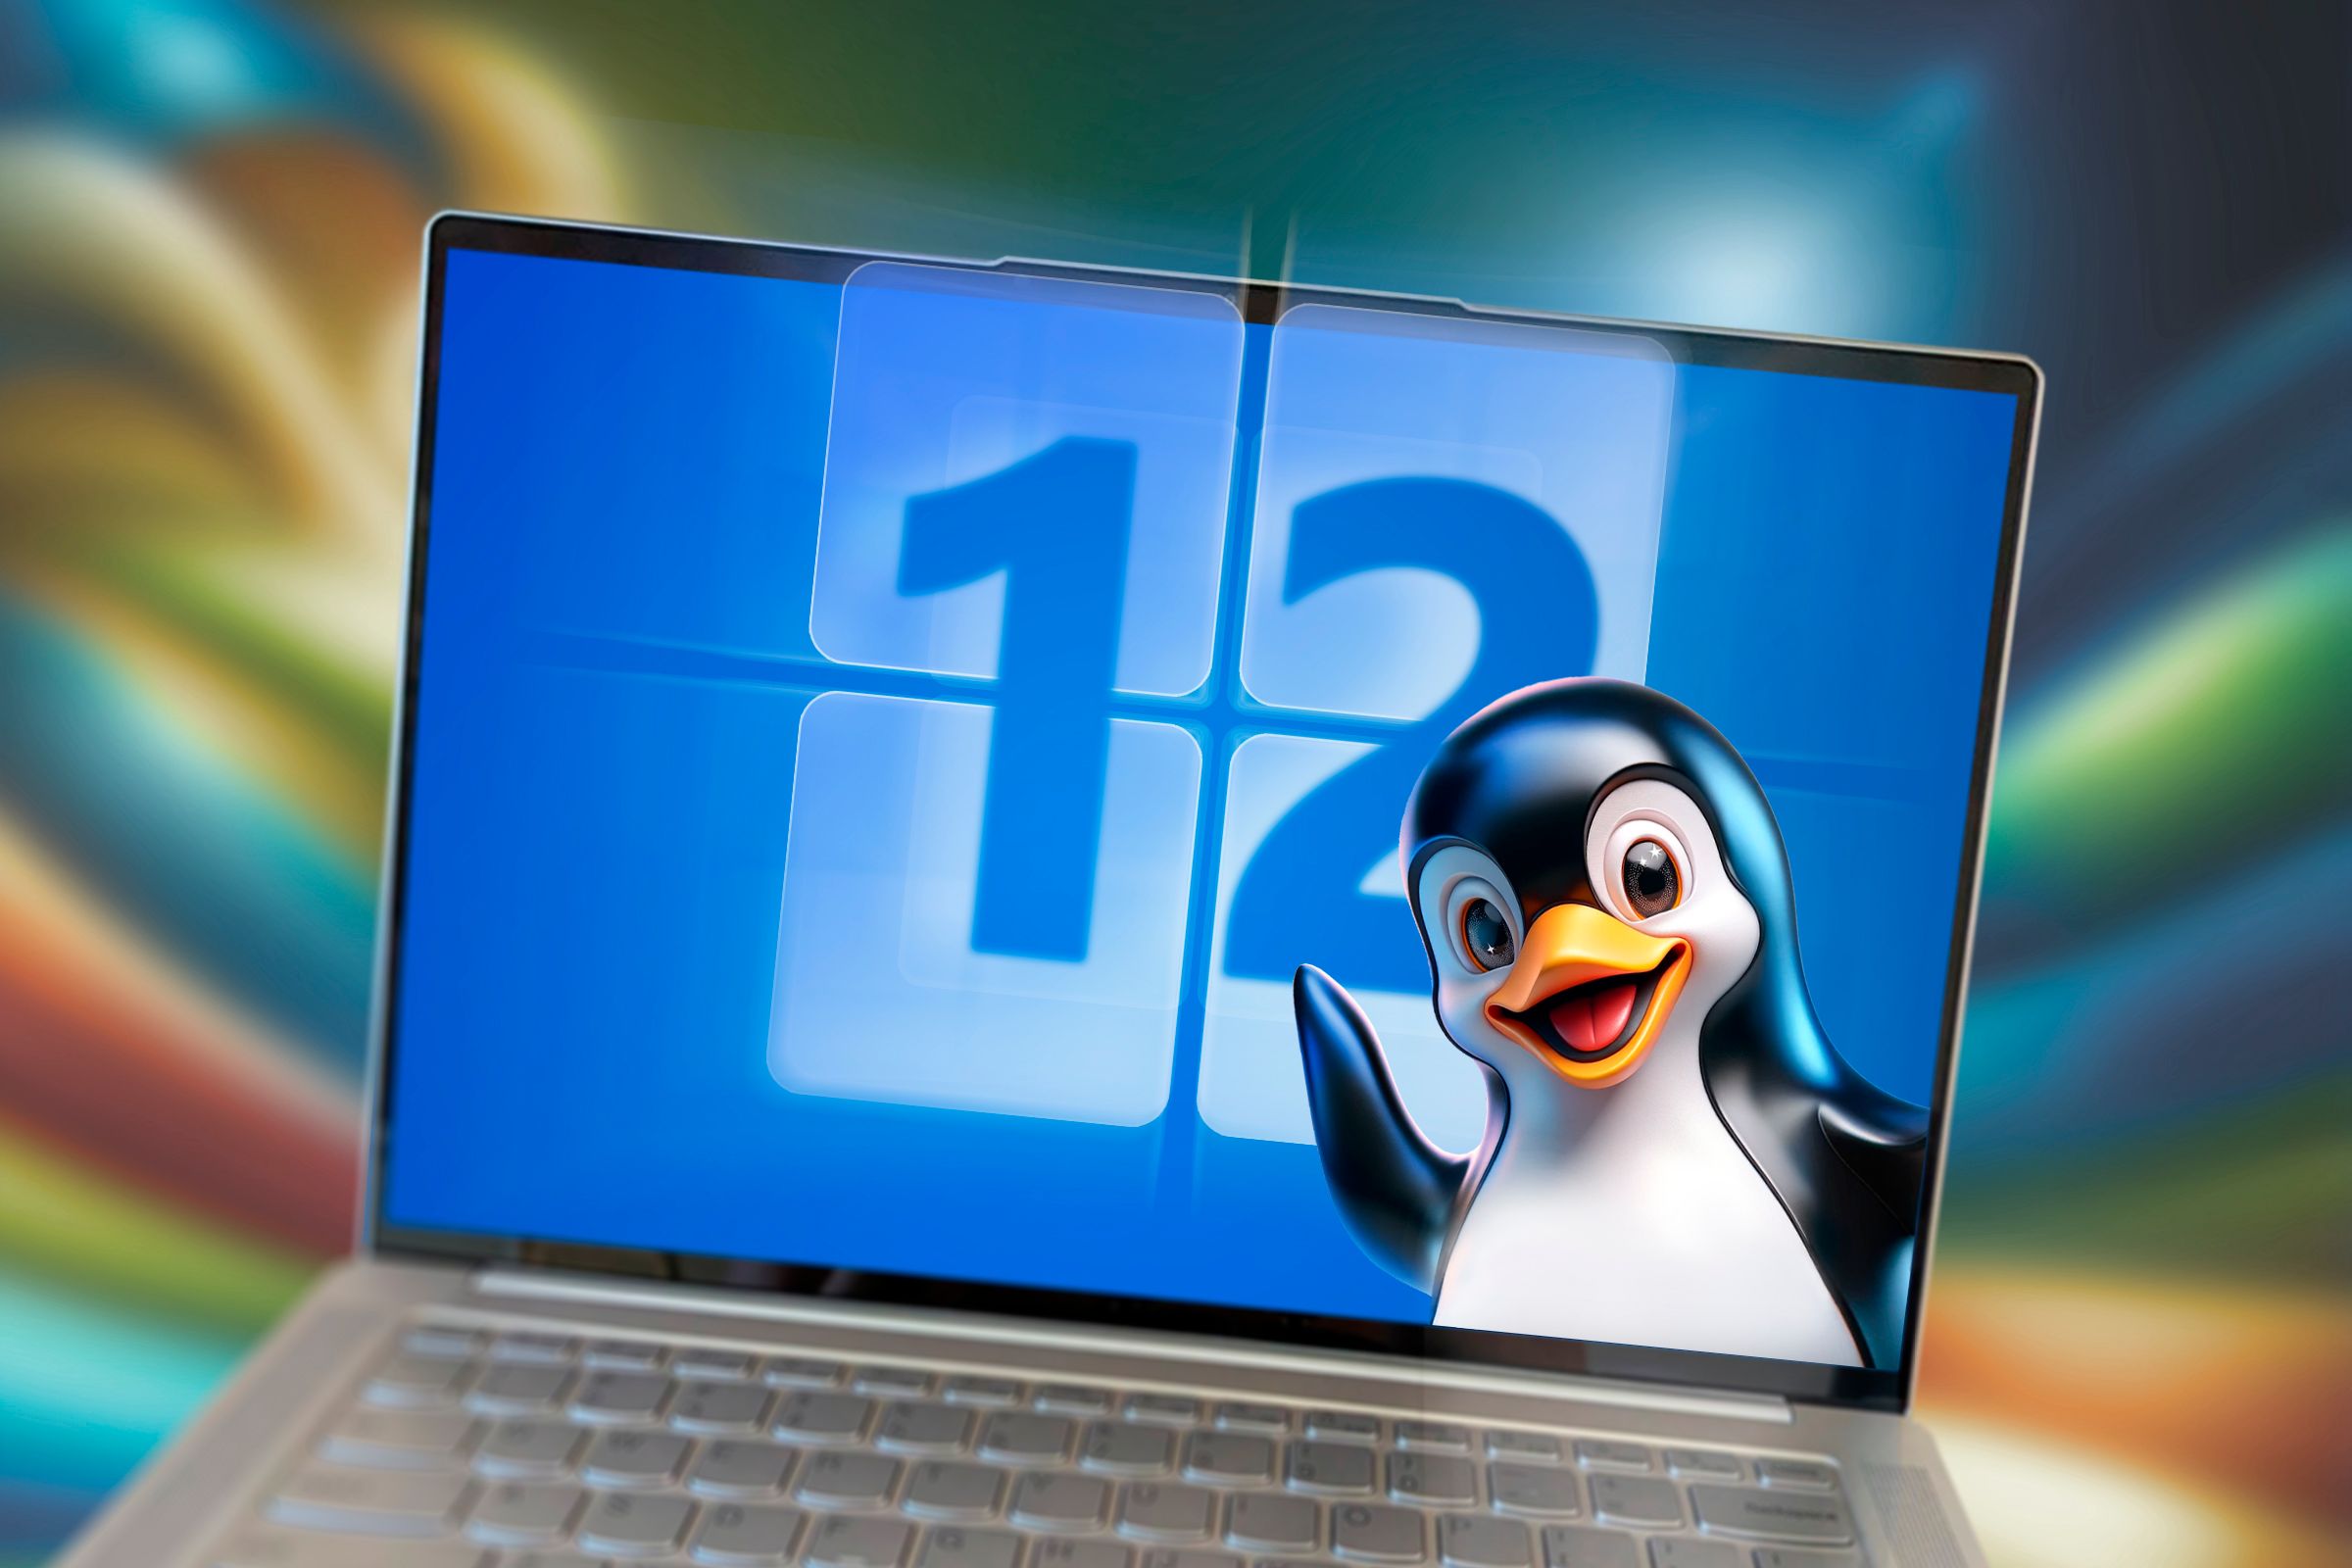 Laptop featuring a hypothetical Windows 12 logo with Tux the Linux penguin waving.